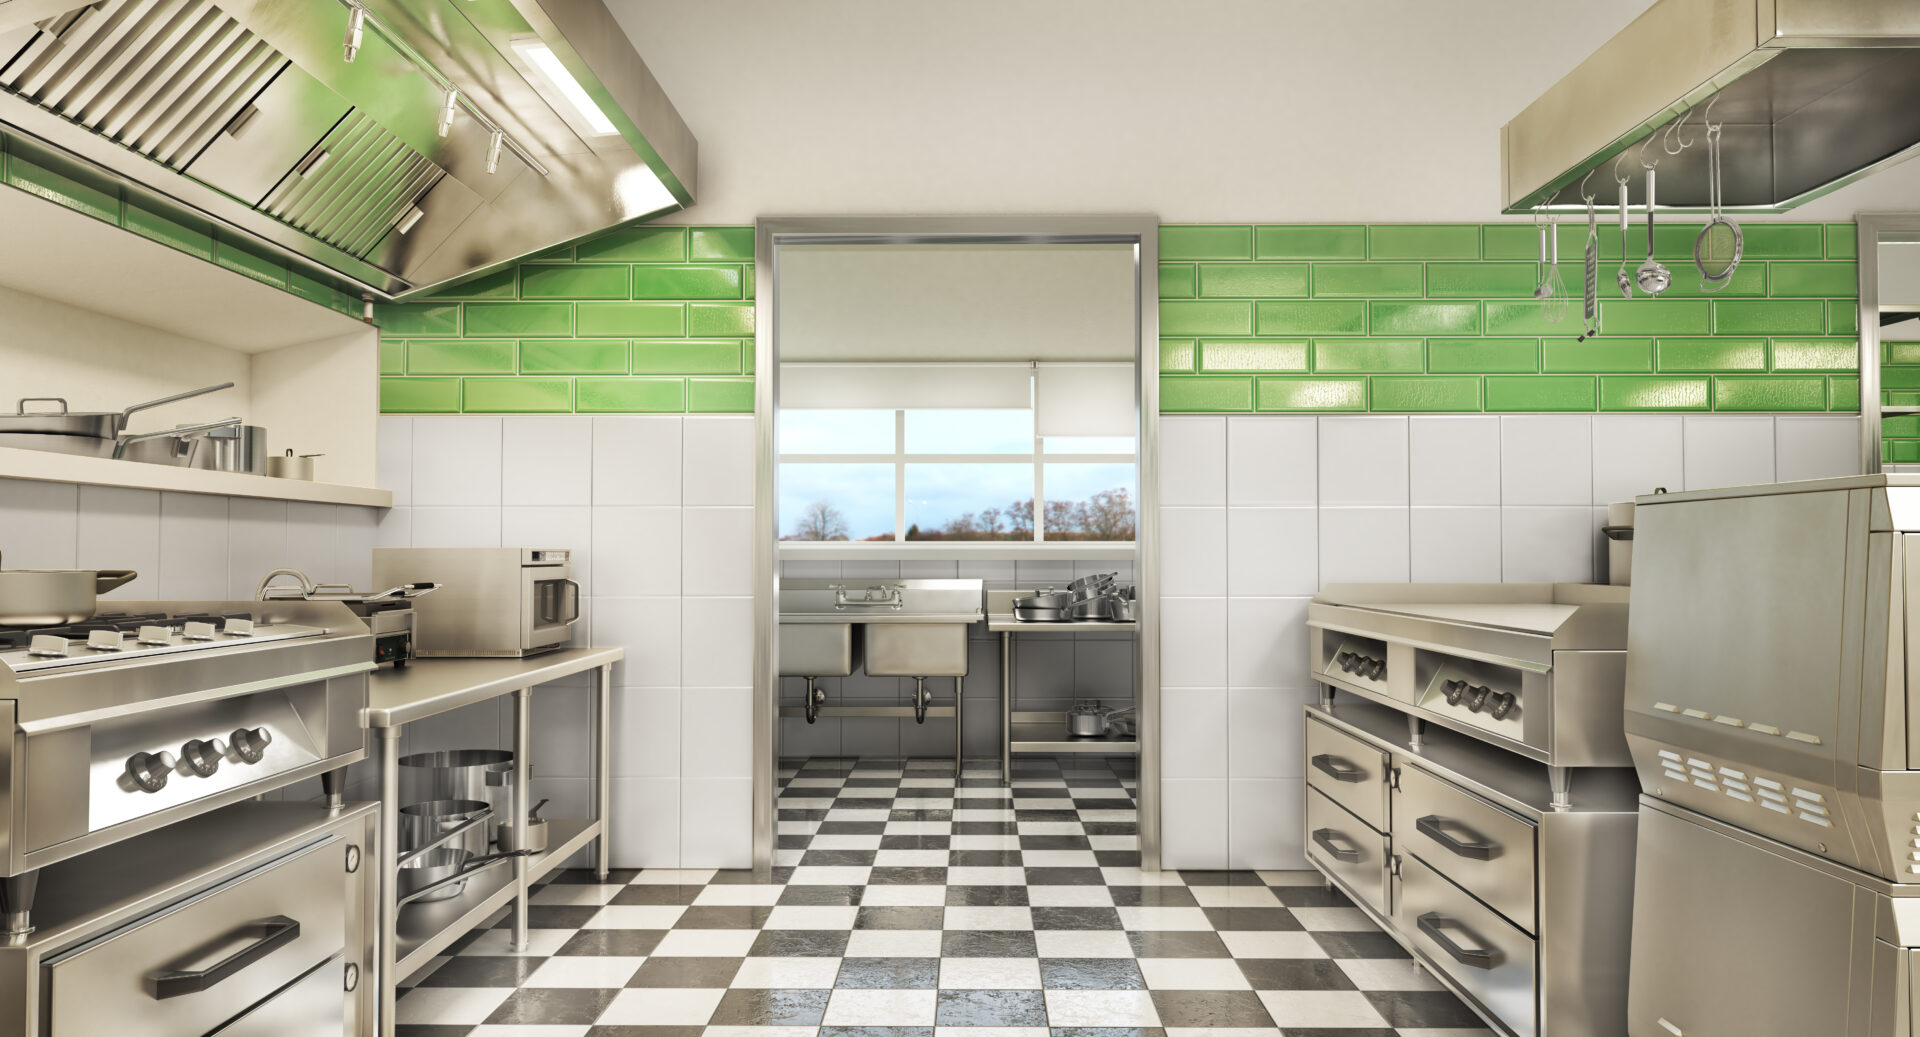 A kitchen with green and white tiles on the walls.